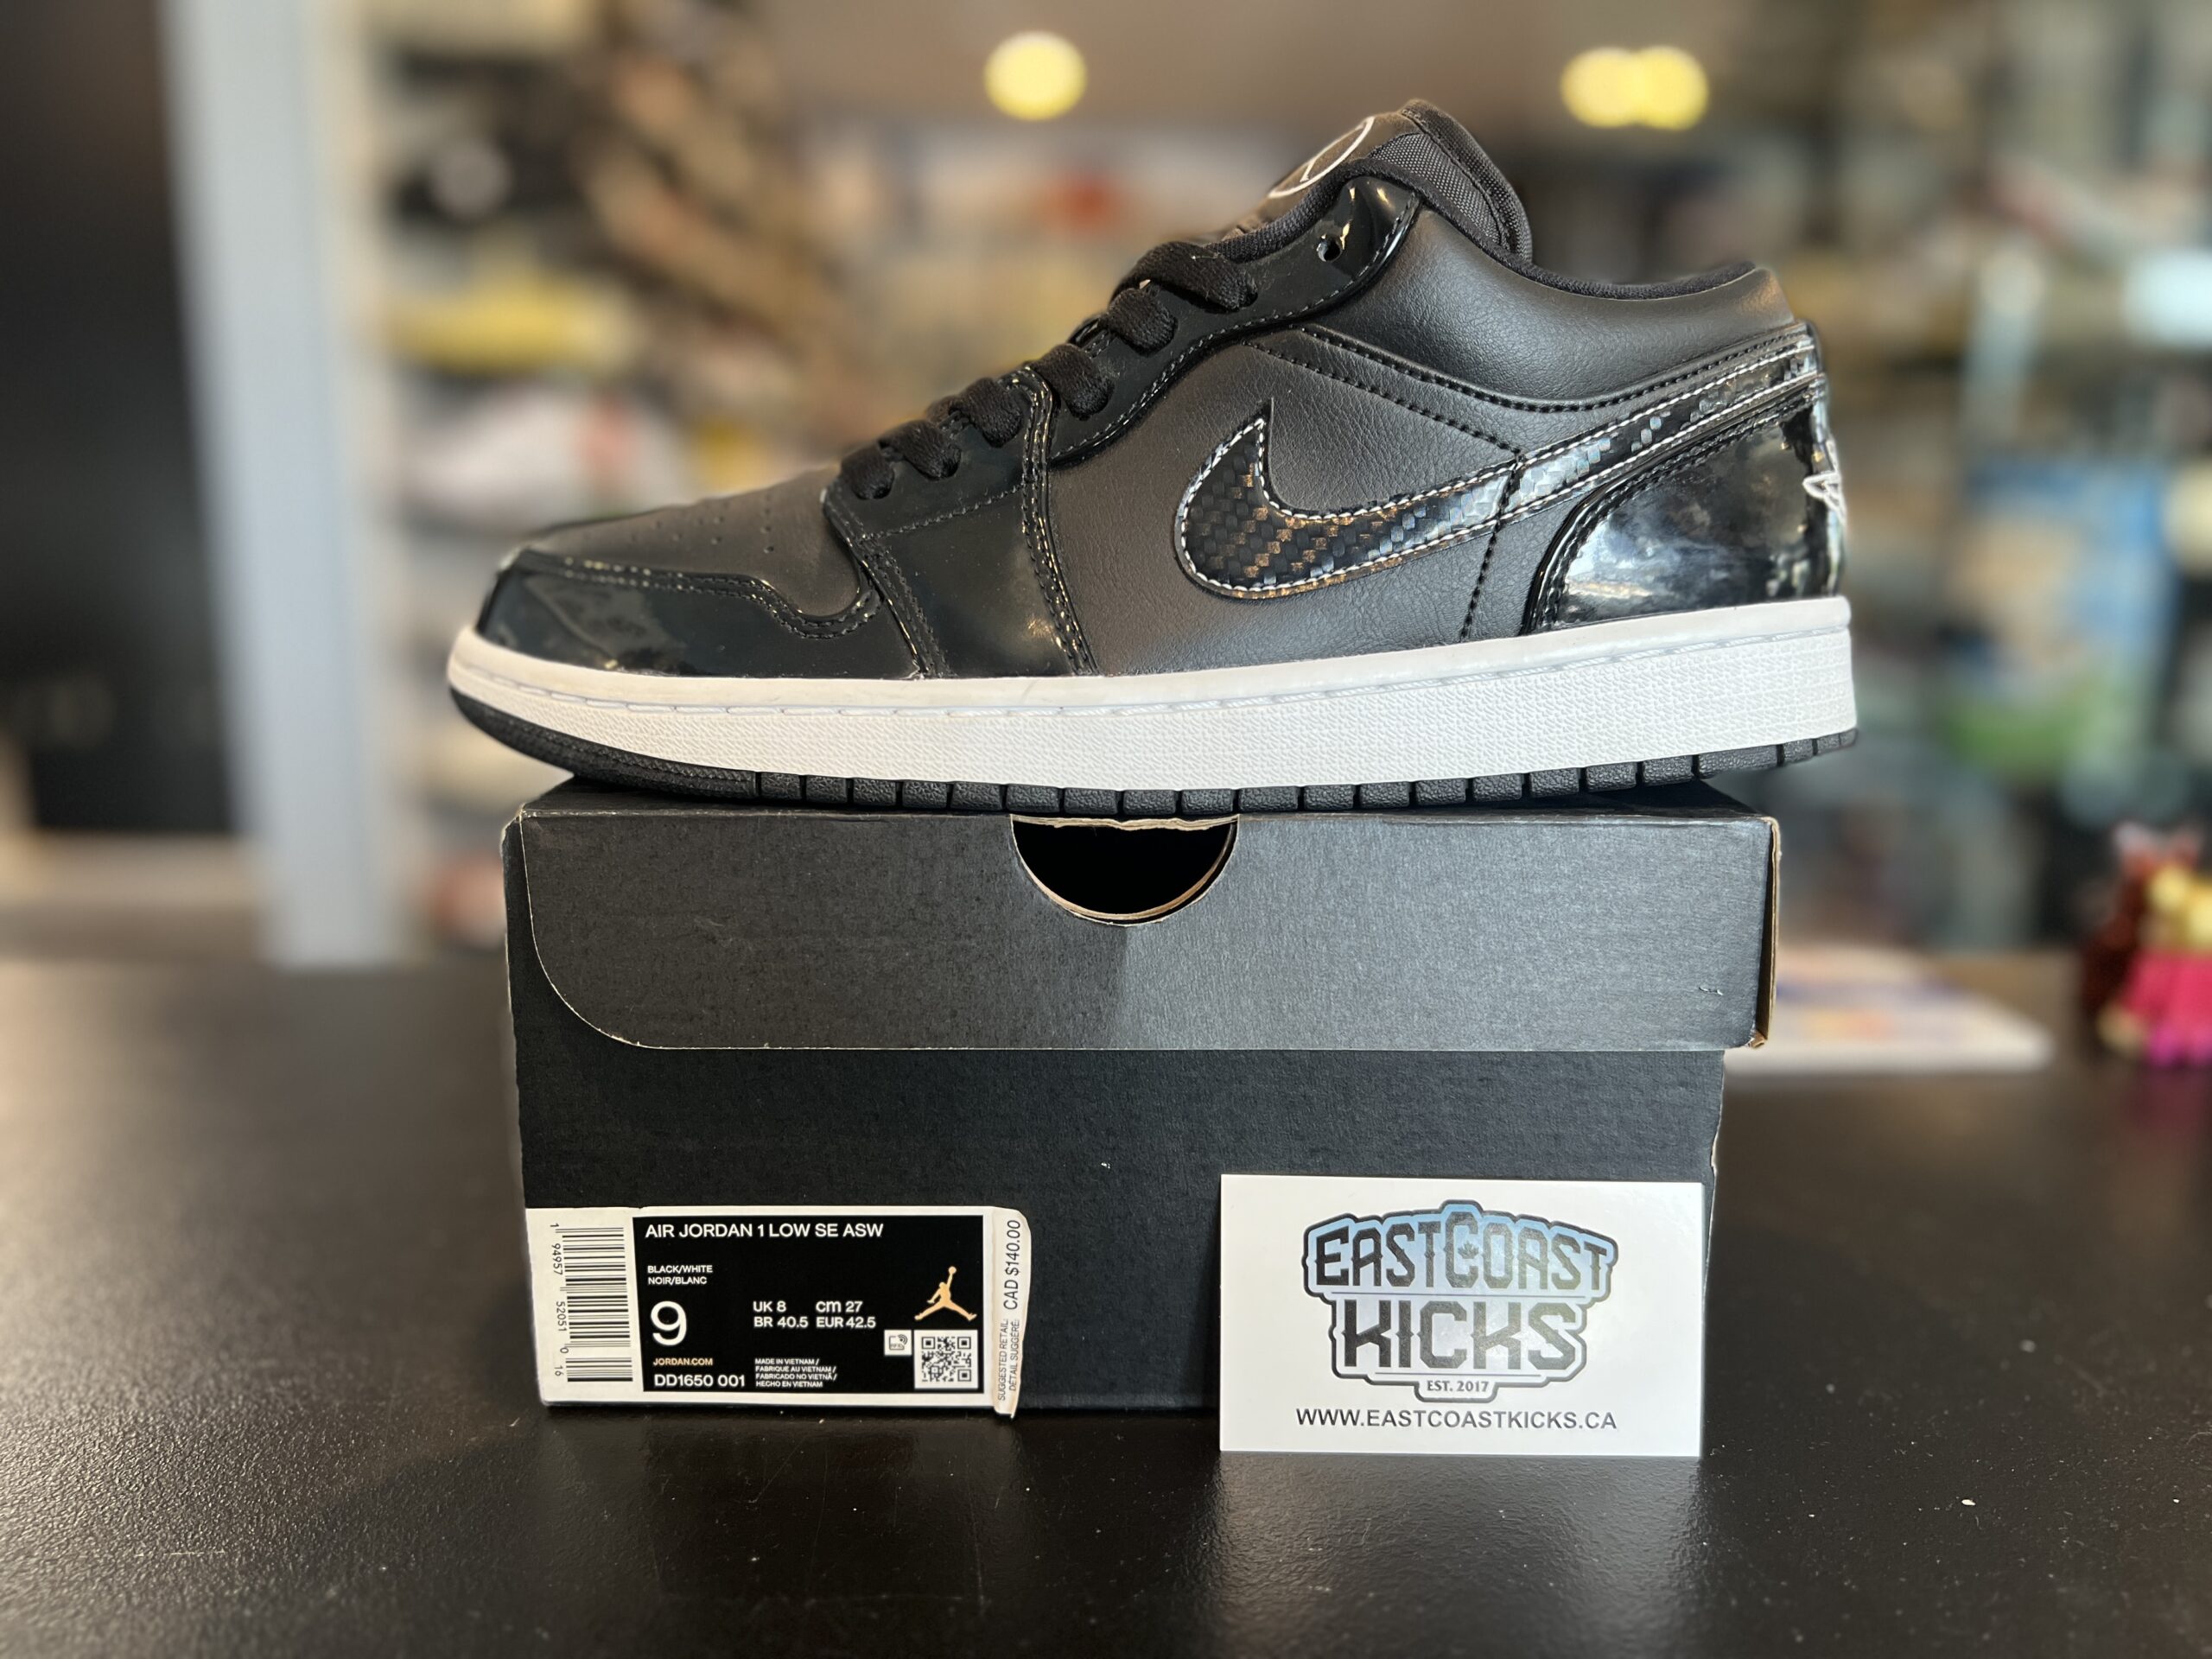 Preowned Jordan 1 Low SE All-Star Size 9